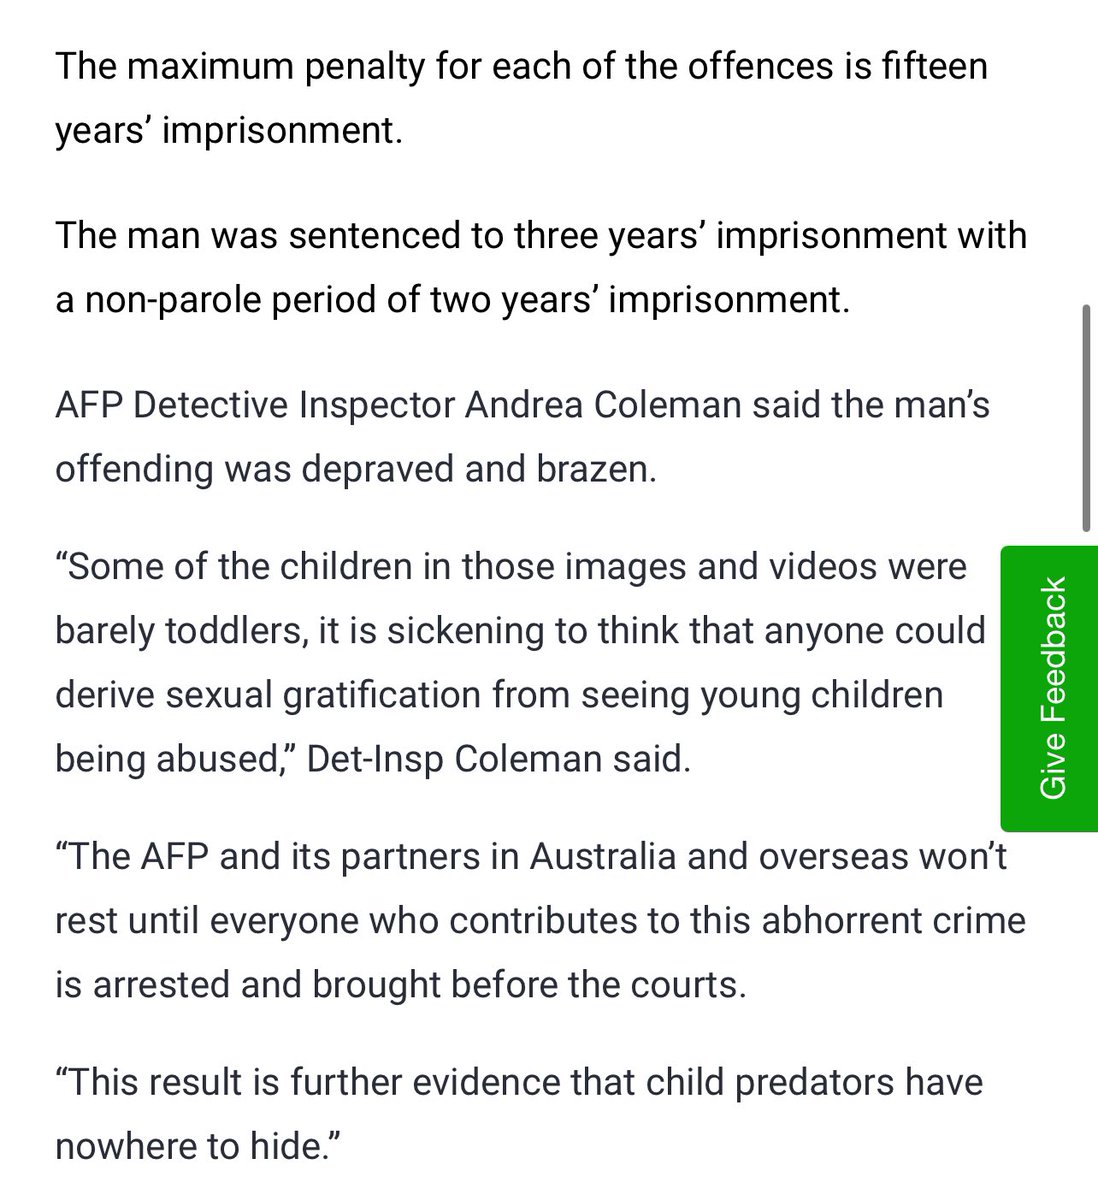 A 21yoM has been sentenced to 3y behind bars for producing, possessing or transmitting almost 2000 child abuse vids & images, including files showing toddler children being sexually abused (!). Maximum sentence for EACH count is 15y! 3 with non parole of 2 seems light??? WHAT!?